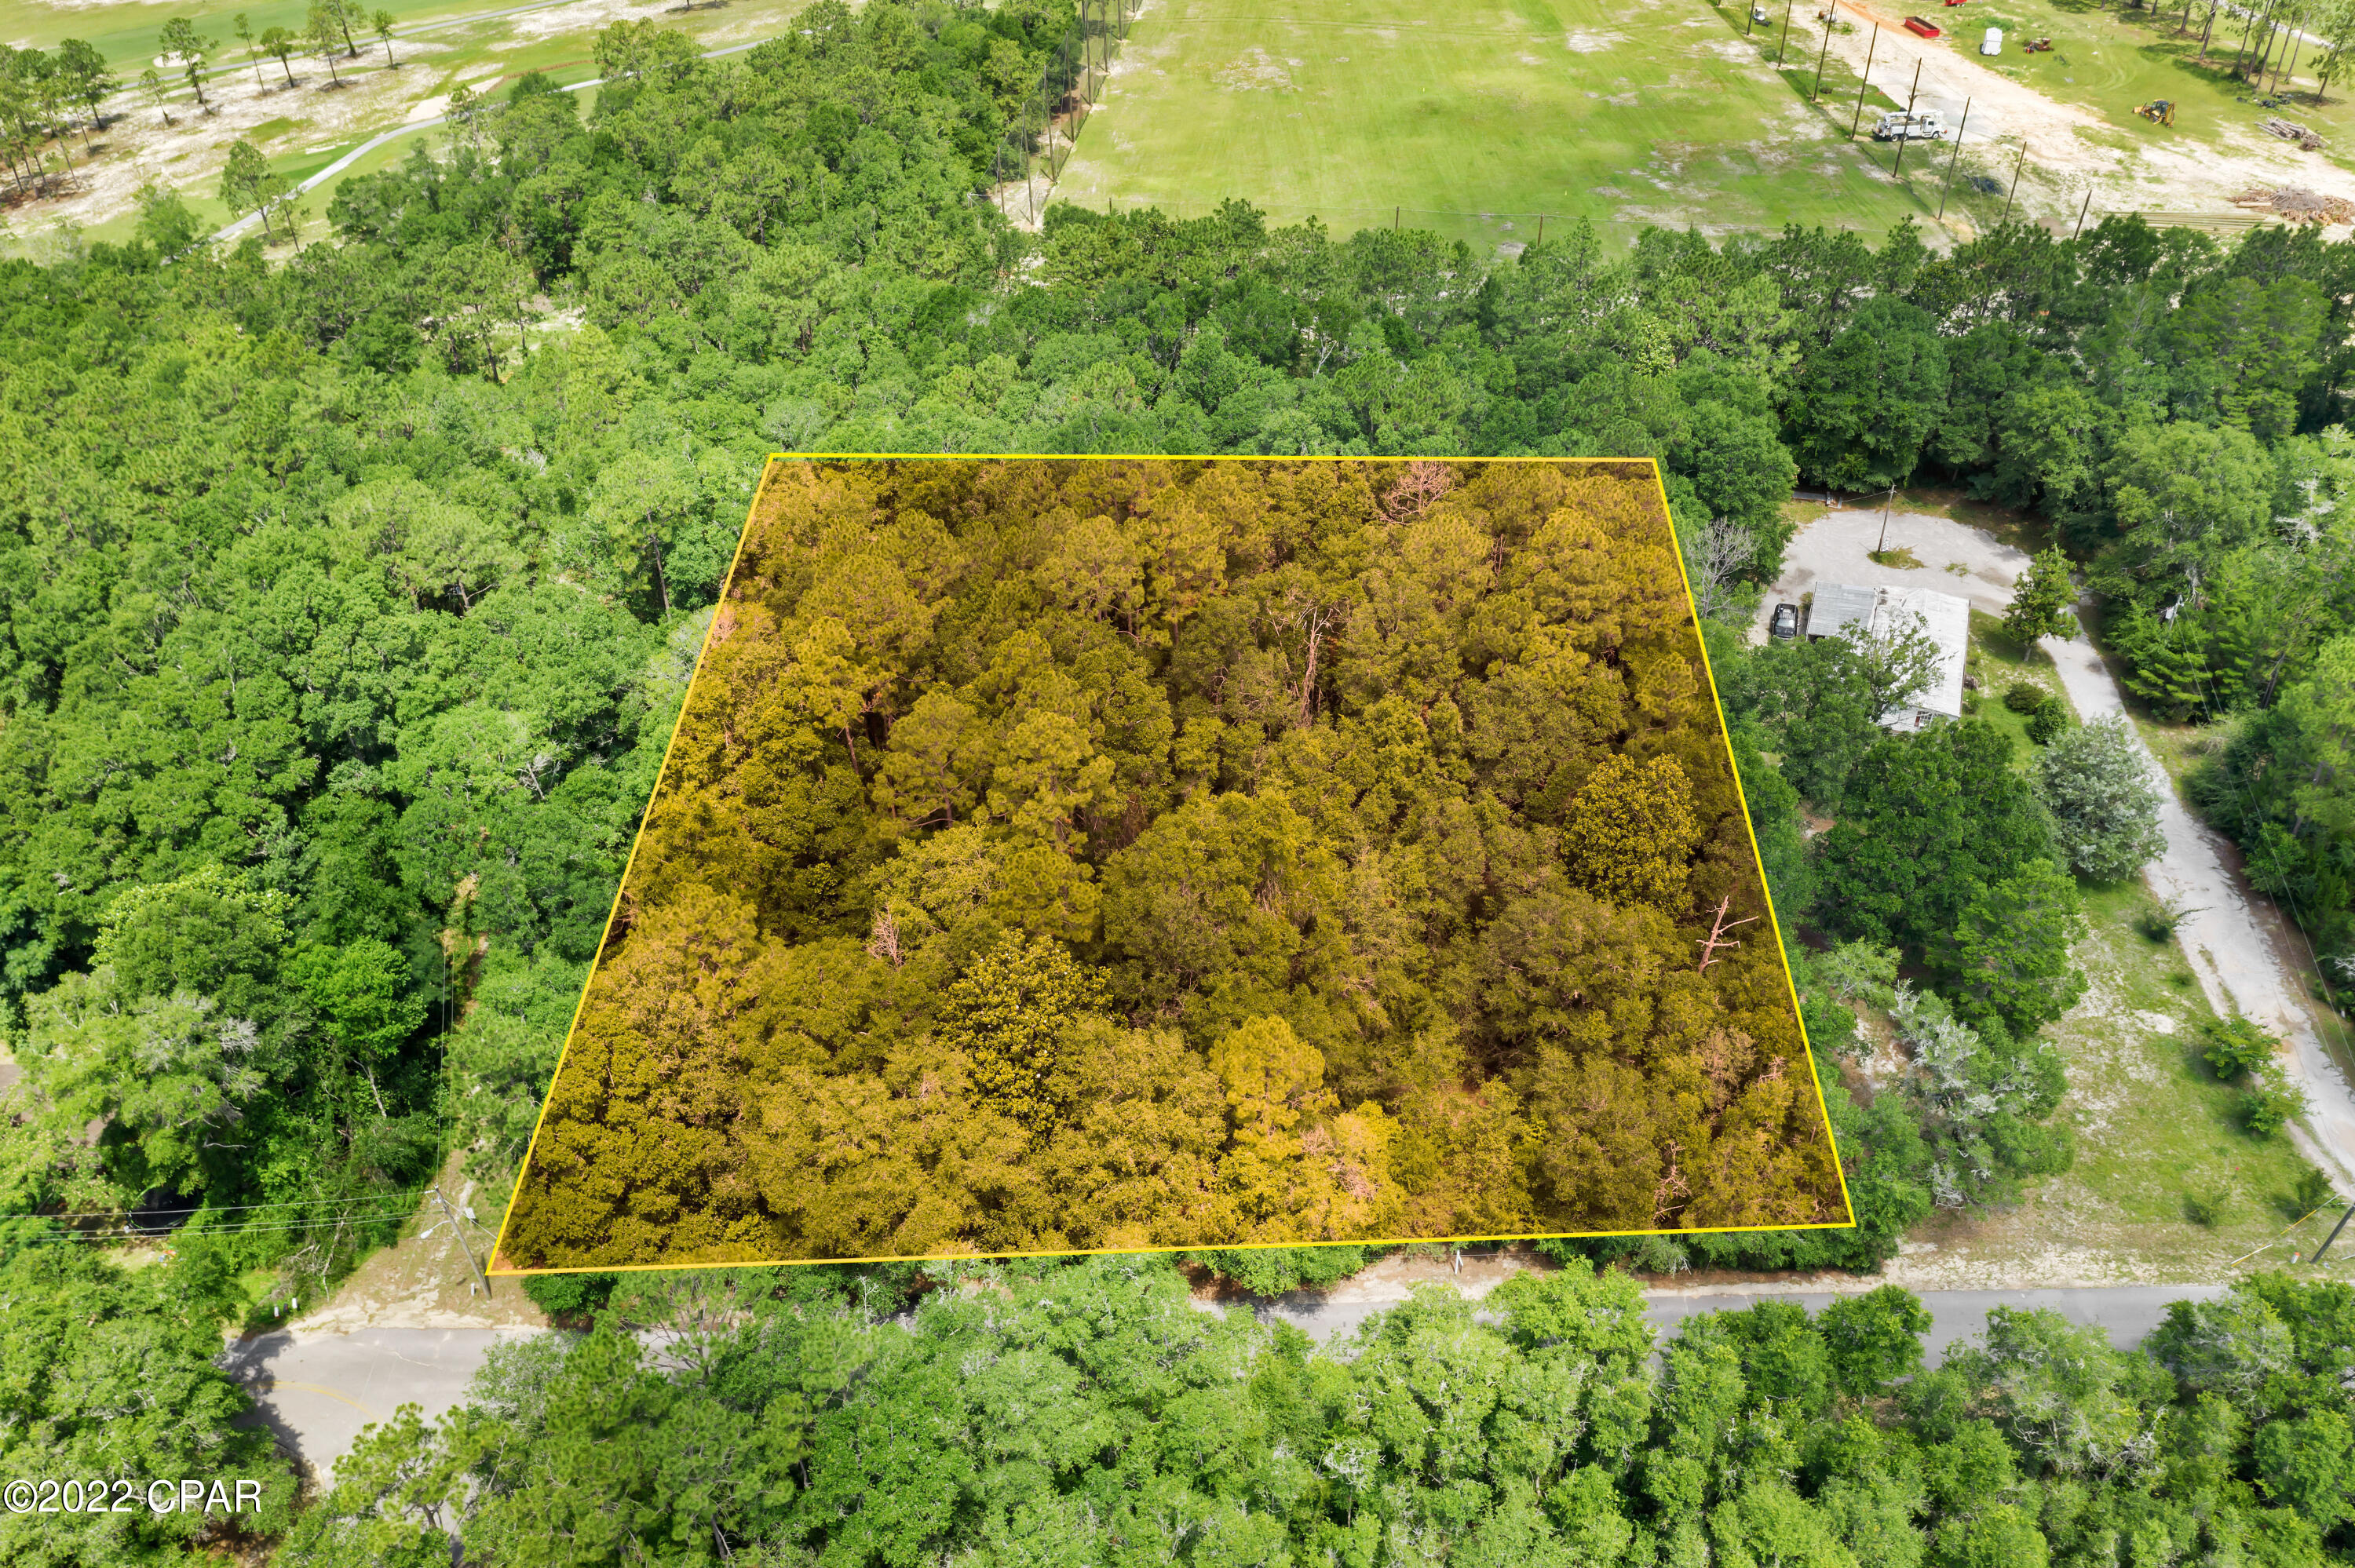 Nice wooded lot on a paved road within the city limits of Defuniak Springs, adjacent to Walton County Country Club with golf course frontage and within walking distance to West Defuniak Elementary School. Would be a great place for a developer to purchase to build townhomes or homes along the golf course.